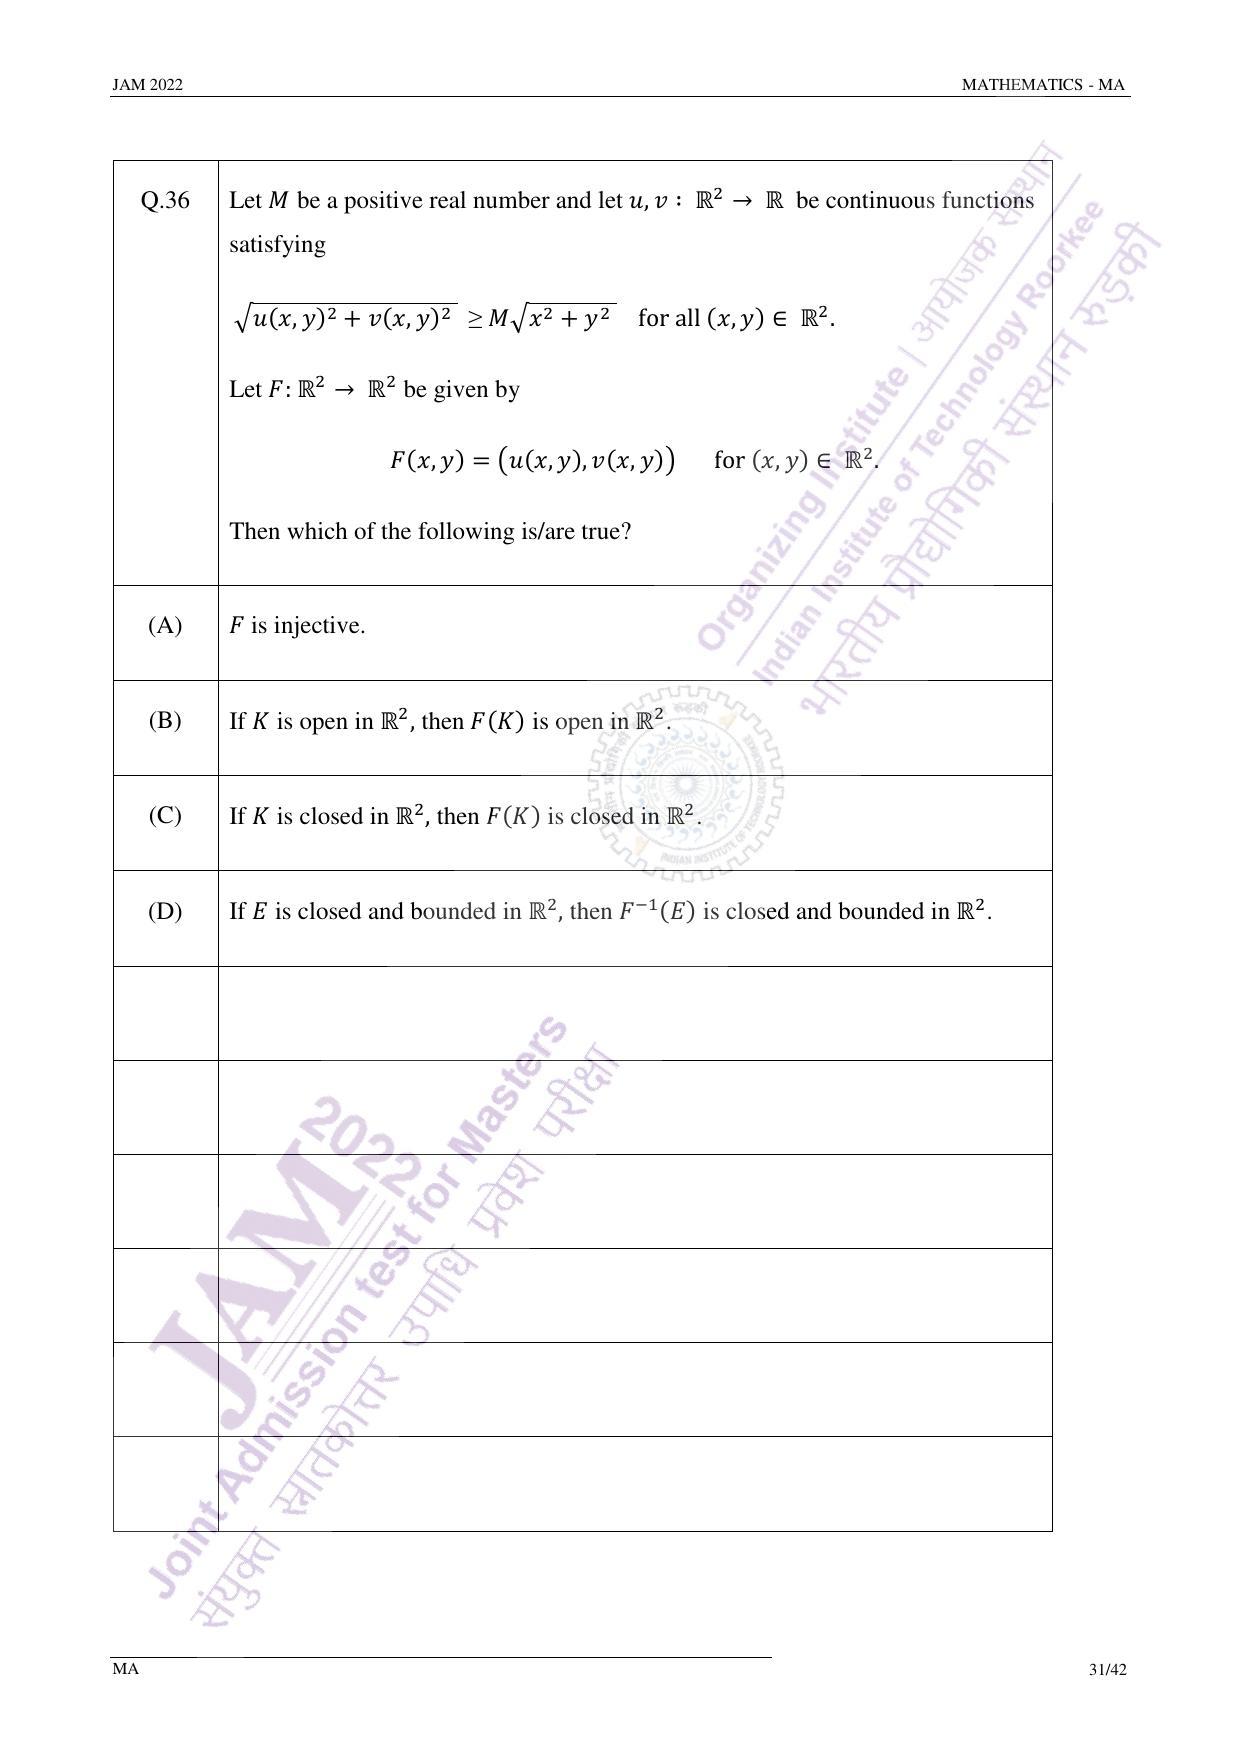 JAM 2022: MA Question Paper - Page 31